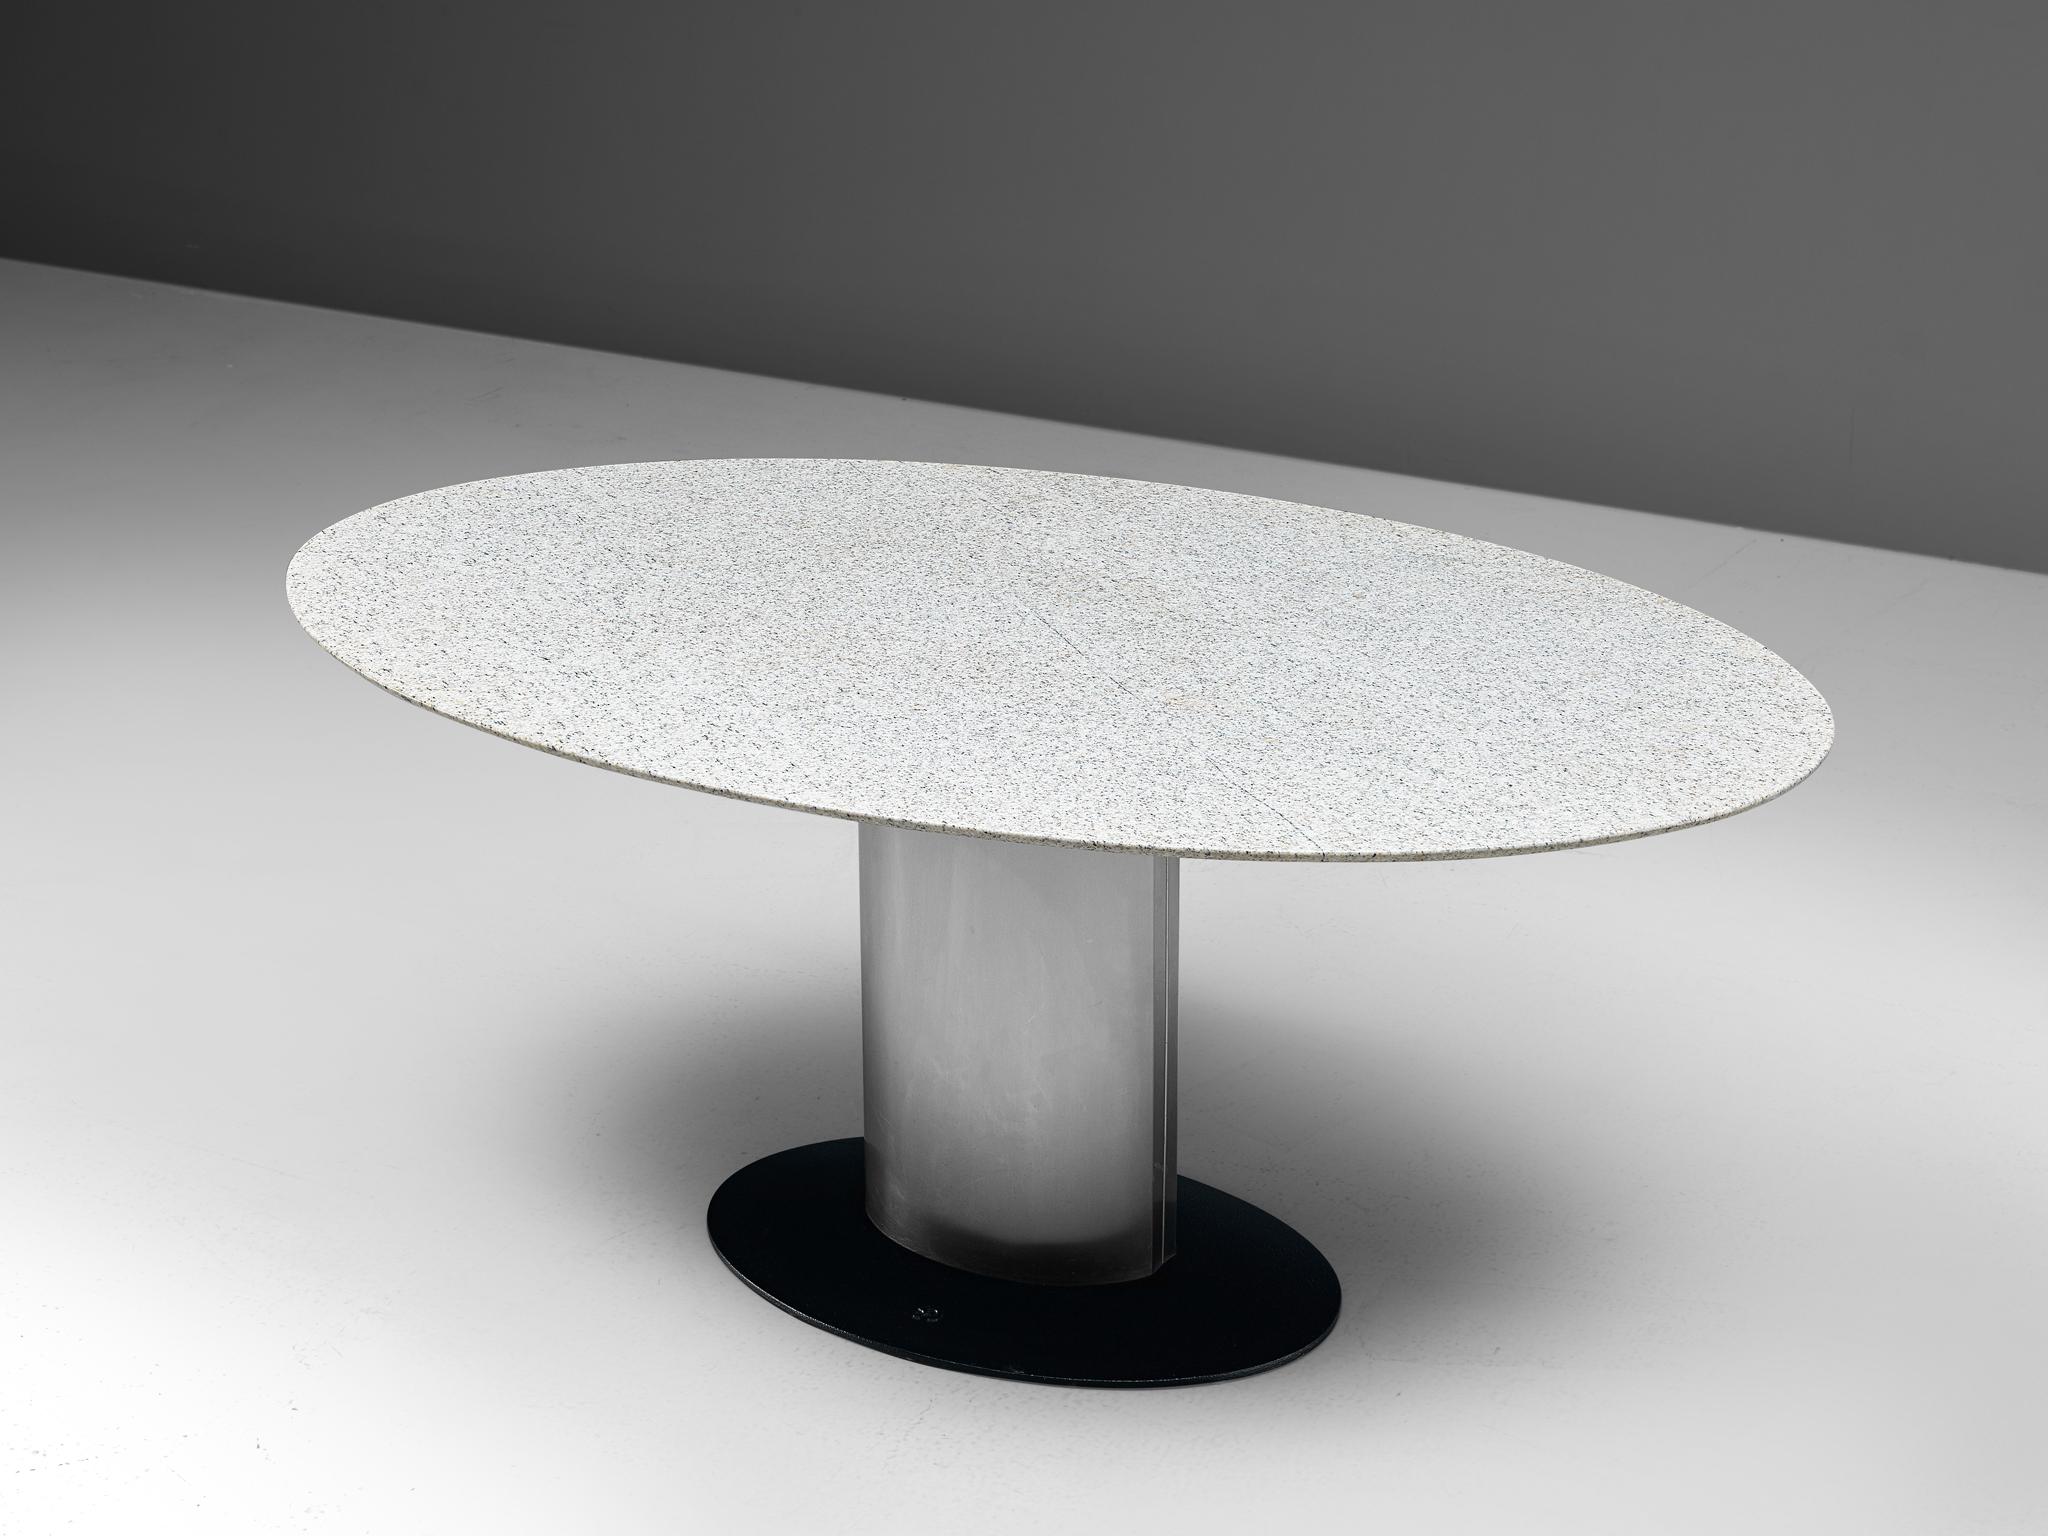 Peter Draenert, pedestal table, white granite, stainless steel, coated metal, Germany, 1970s

The oval shaped marble-top of this table is a striking combination with its oval metal pedestal base. The black lacquered foot following the metal base